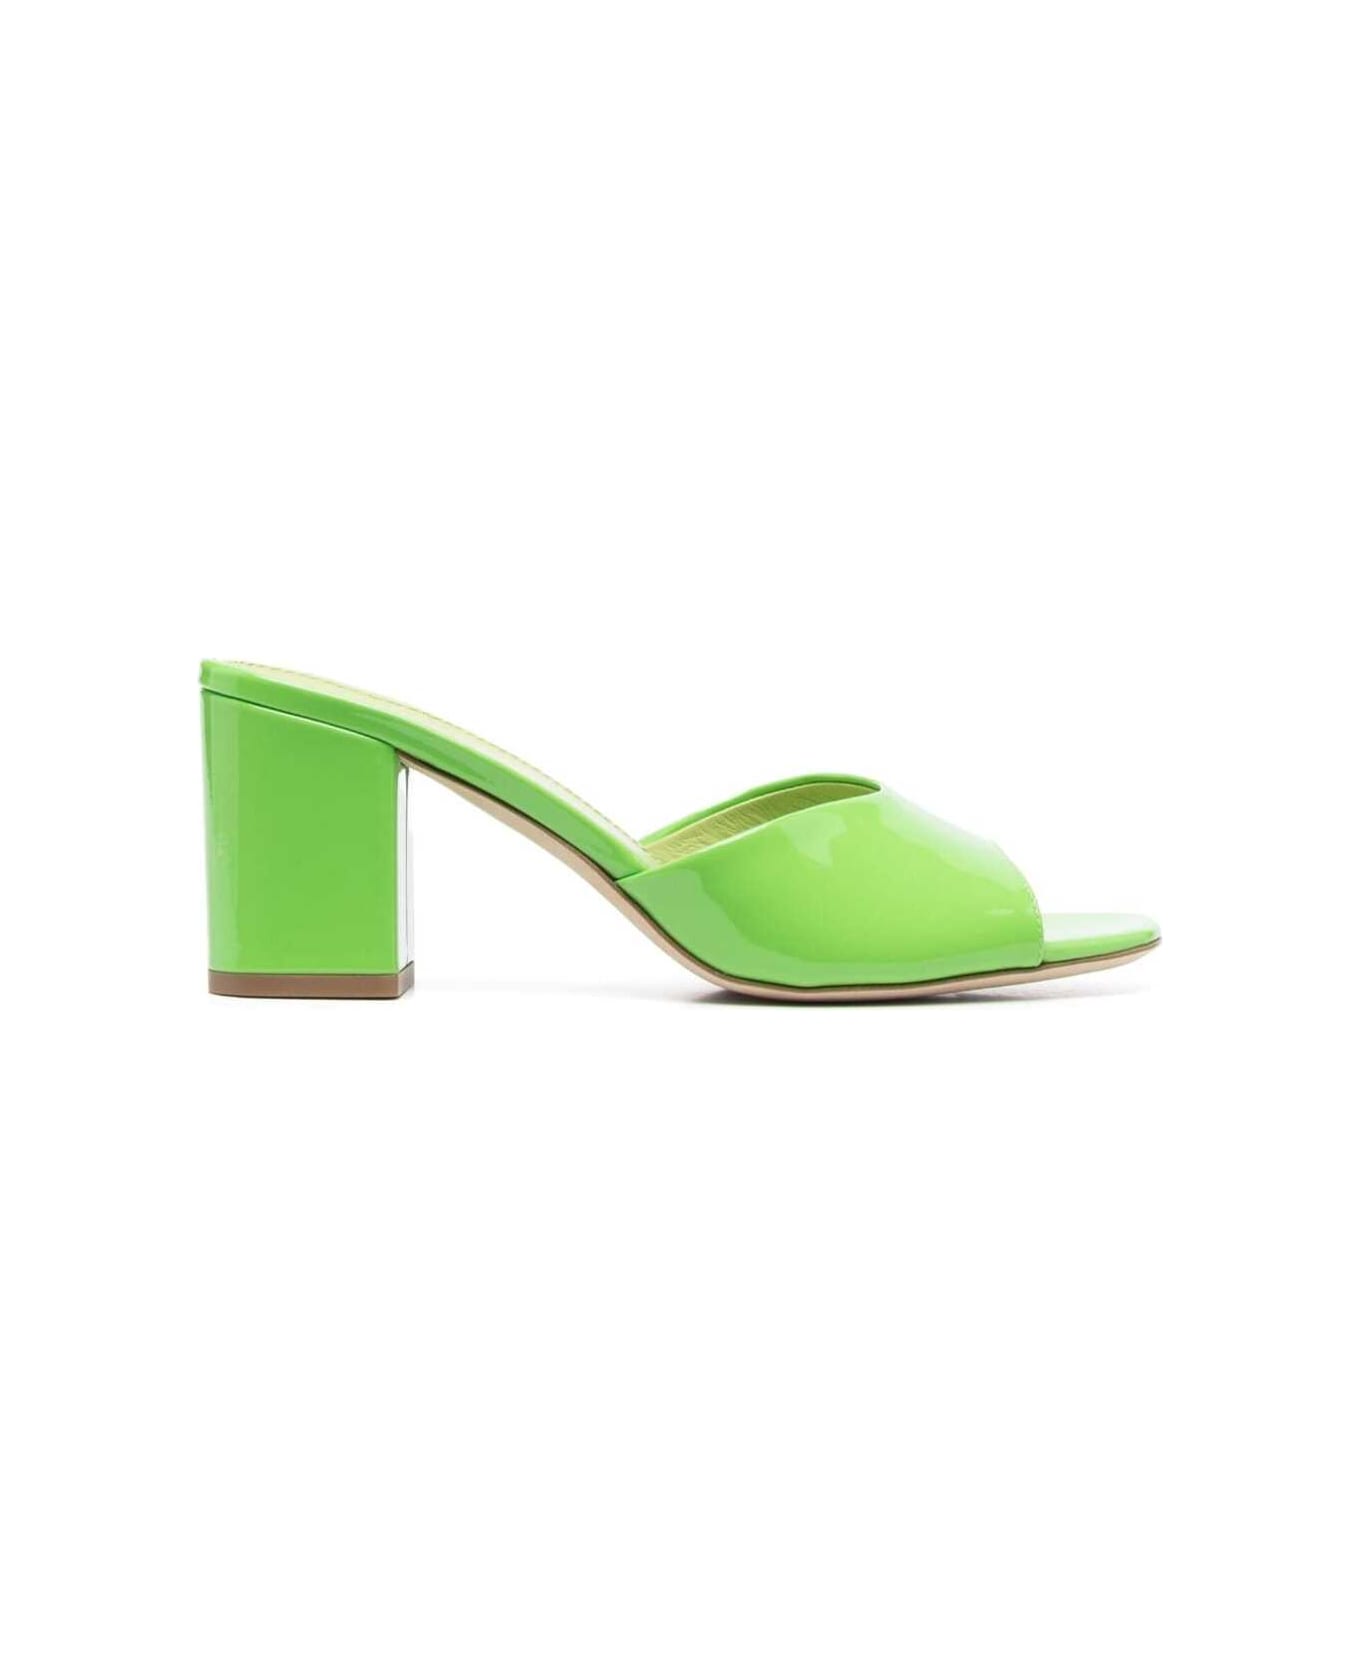 Paris Texas 'anja' Green Mules With Block Heel In Patent Leather Woman - Green